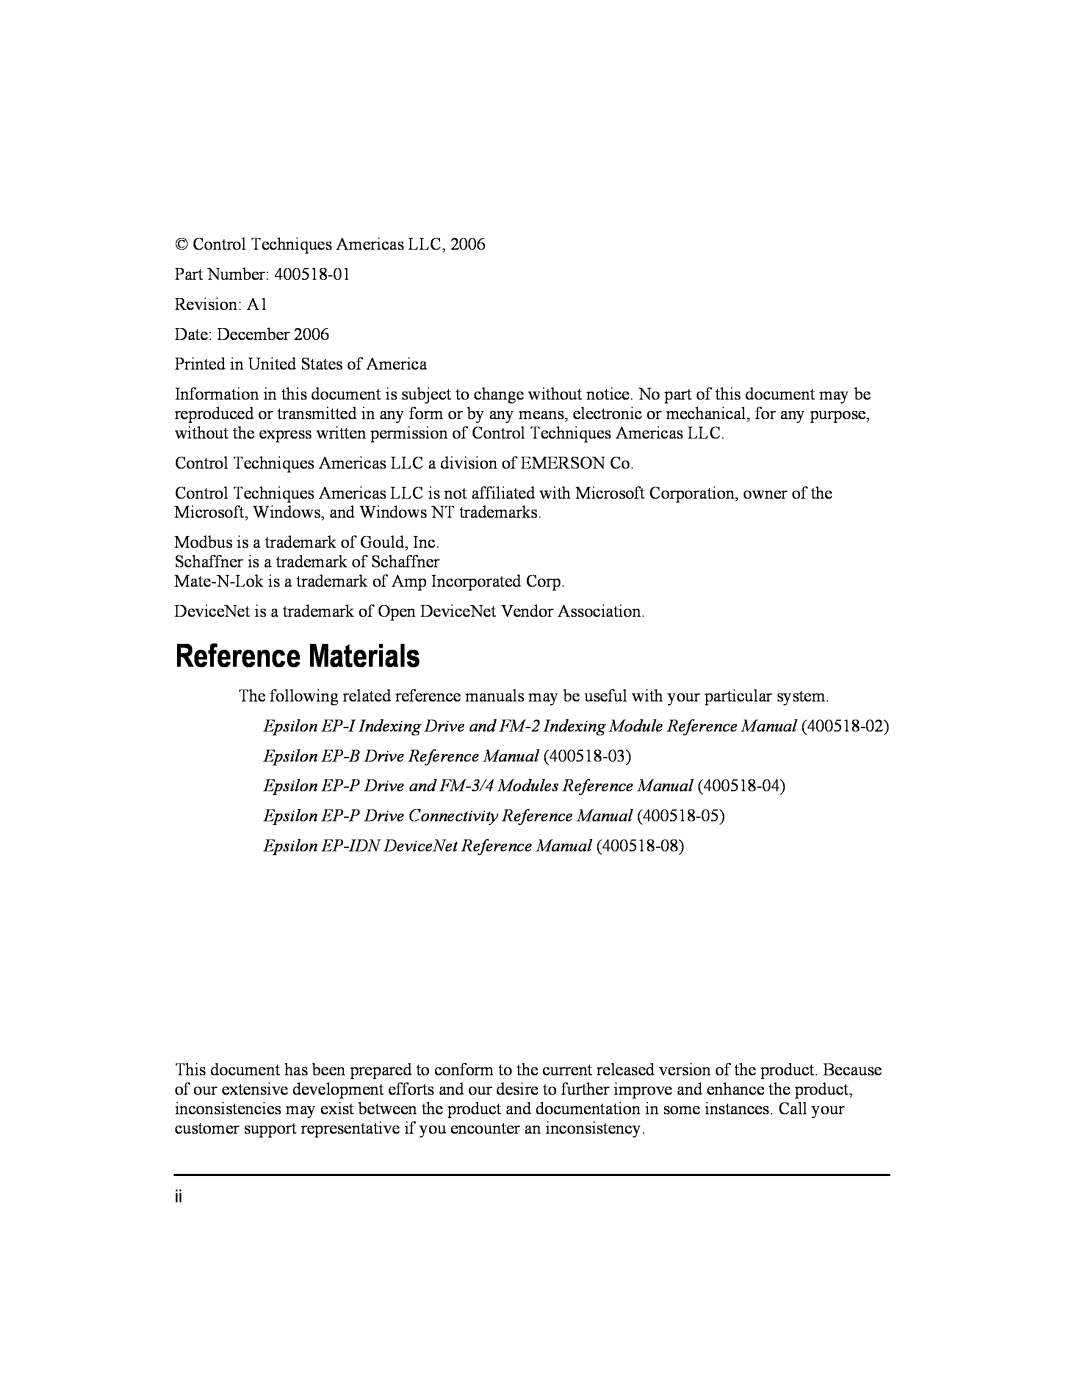 Emerson 400518-01 installation manual Reference Materials 